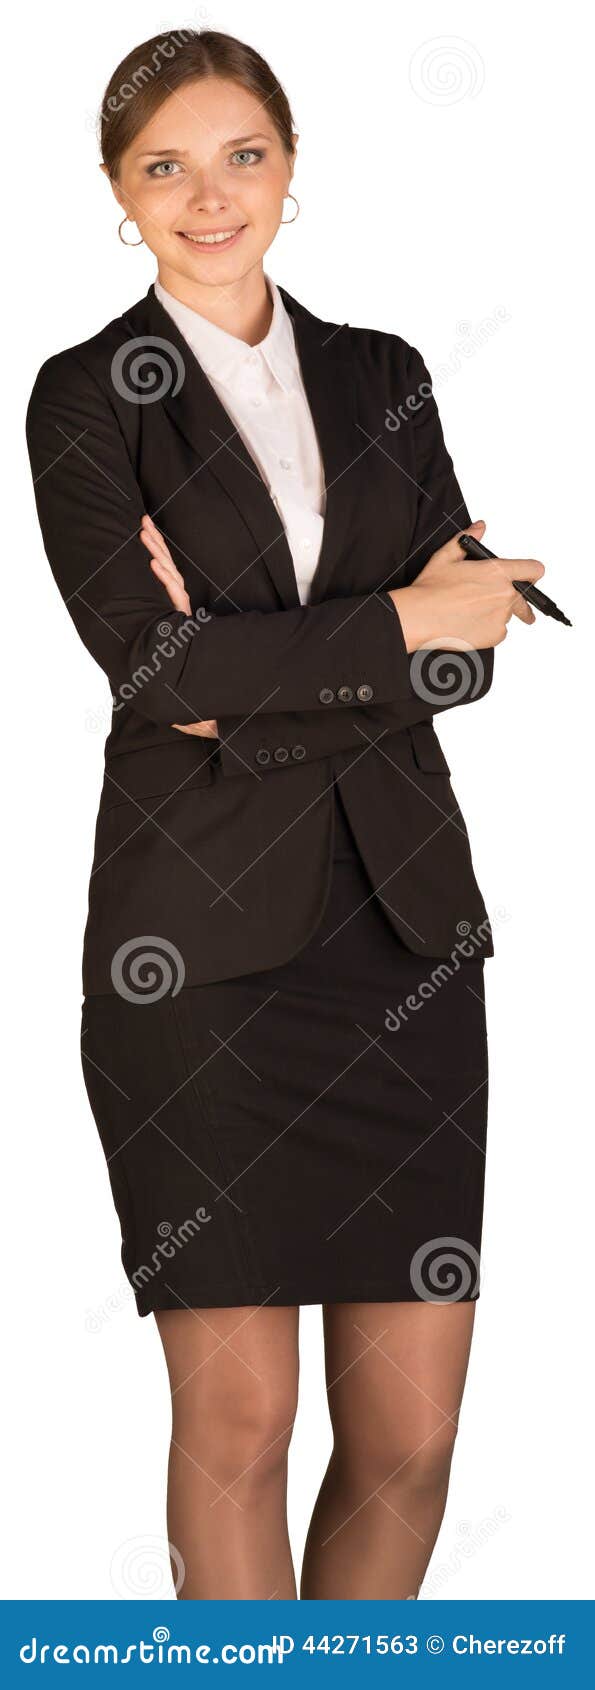 Beautiful Girl In Business Suit Holding Pen Stock Image - Image of ...